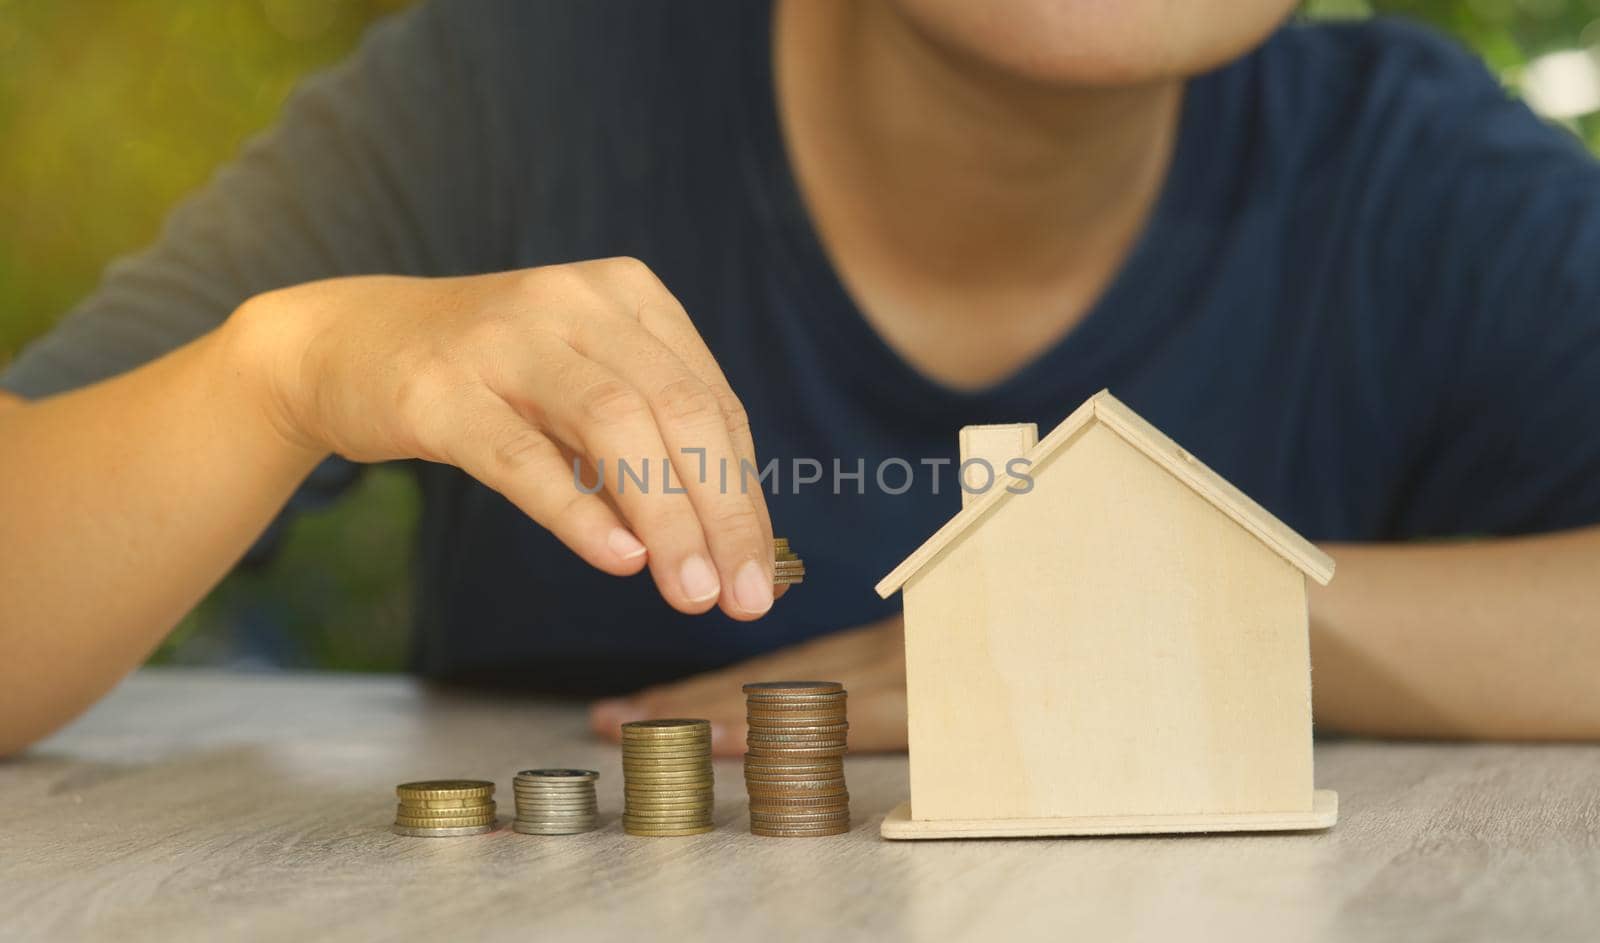 Abstract Investor puts coins stacked on the desk with mockup house concept auction value real estate investment wealth financial investment and business income growth.